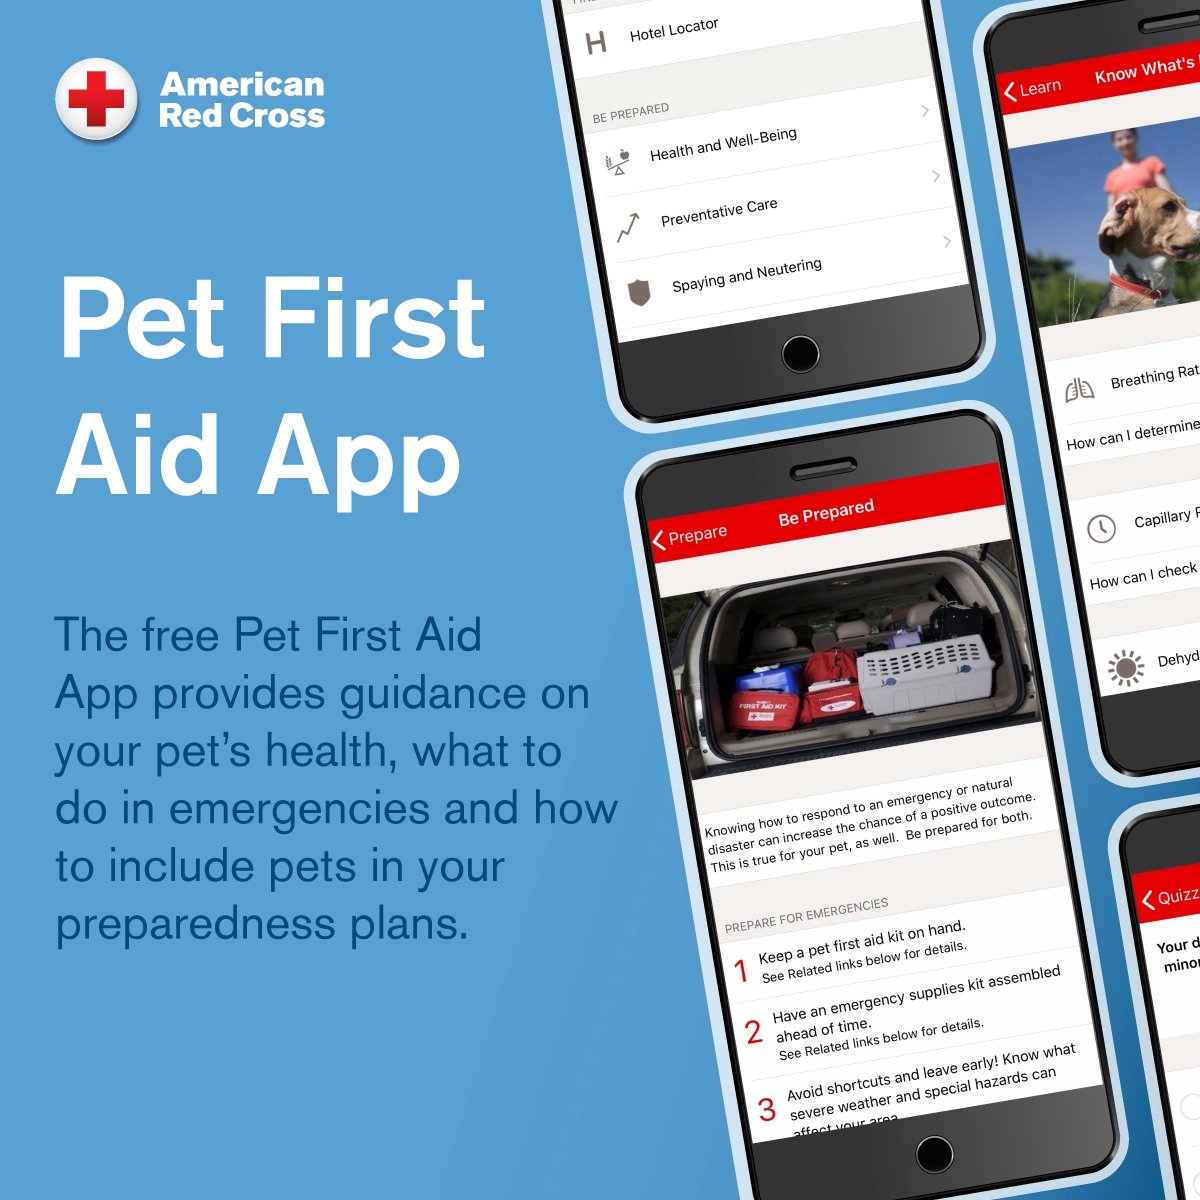 We wanted to celebrate April being National Pet First Aid Awareness month by reminding you that we have a free Pet First Aid mobile app! Look for it wherever you get your apps, or text GETPET' to 90999. #pet1staid ##petfirstaidawarenessmonth